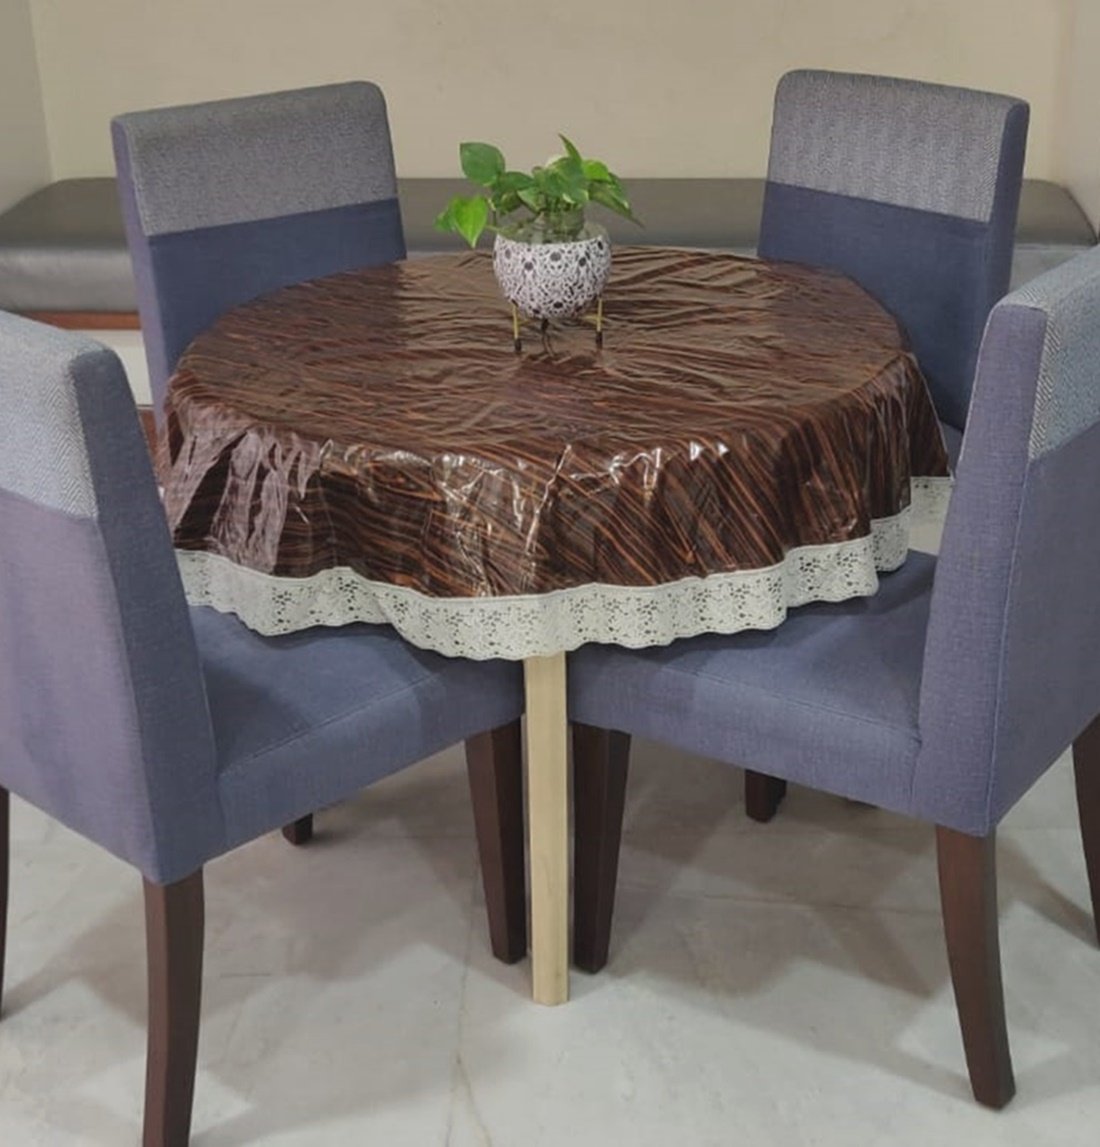 Griiham PVC 4 Seater Printed Round Table Cover (Size - 60 inches) Design - Wooden Print VK01